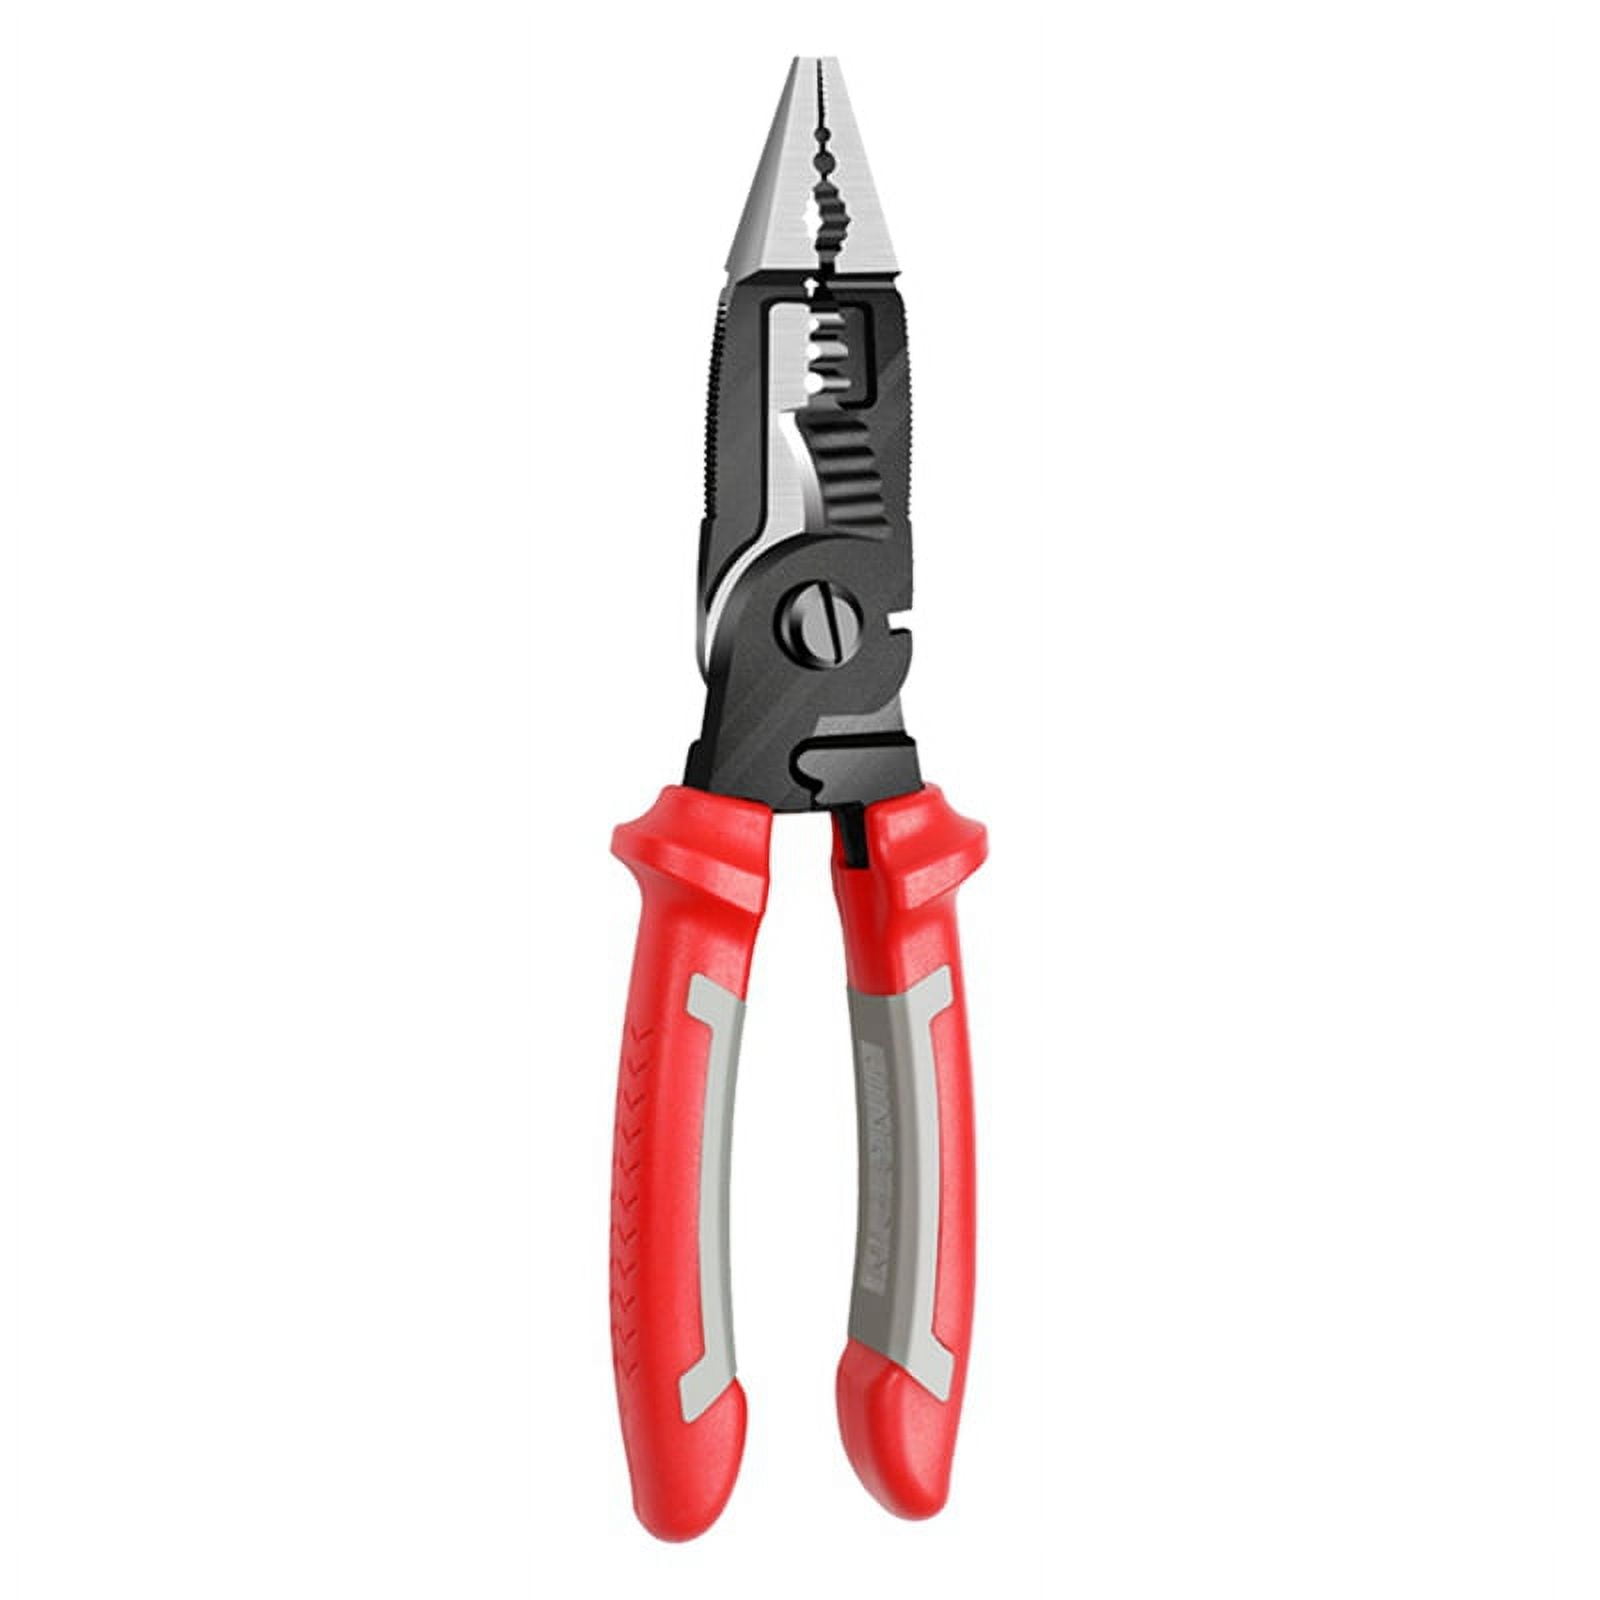 5 In 1 Versatile Tool Kit With Linesman Plier Wire Stripper